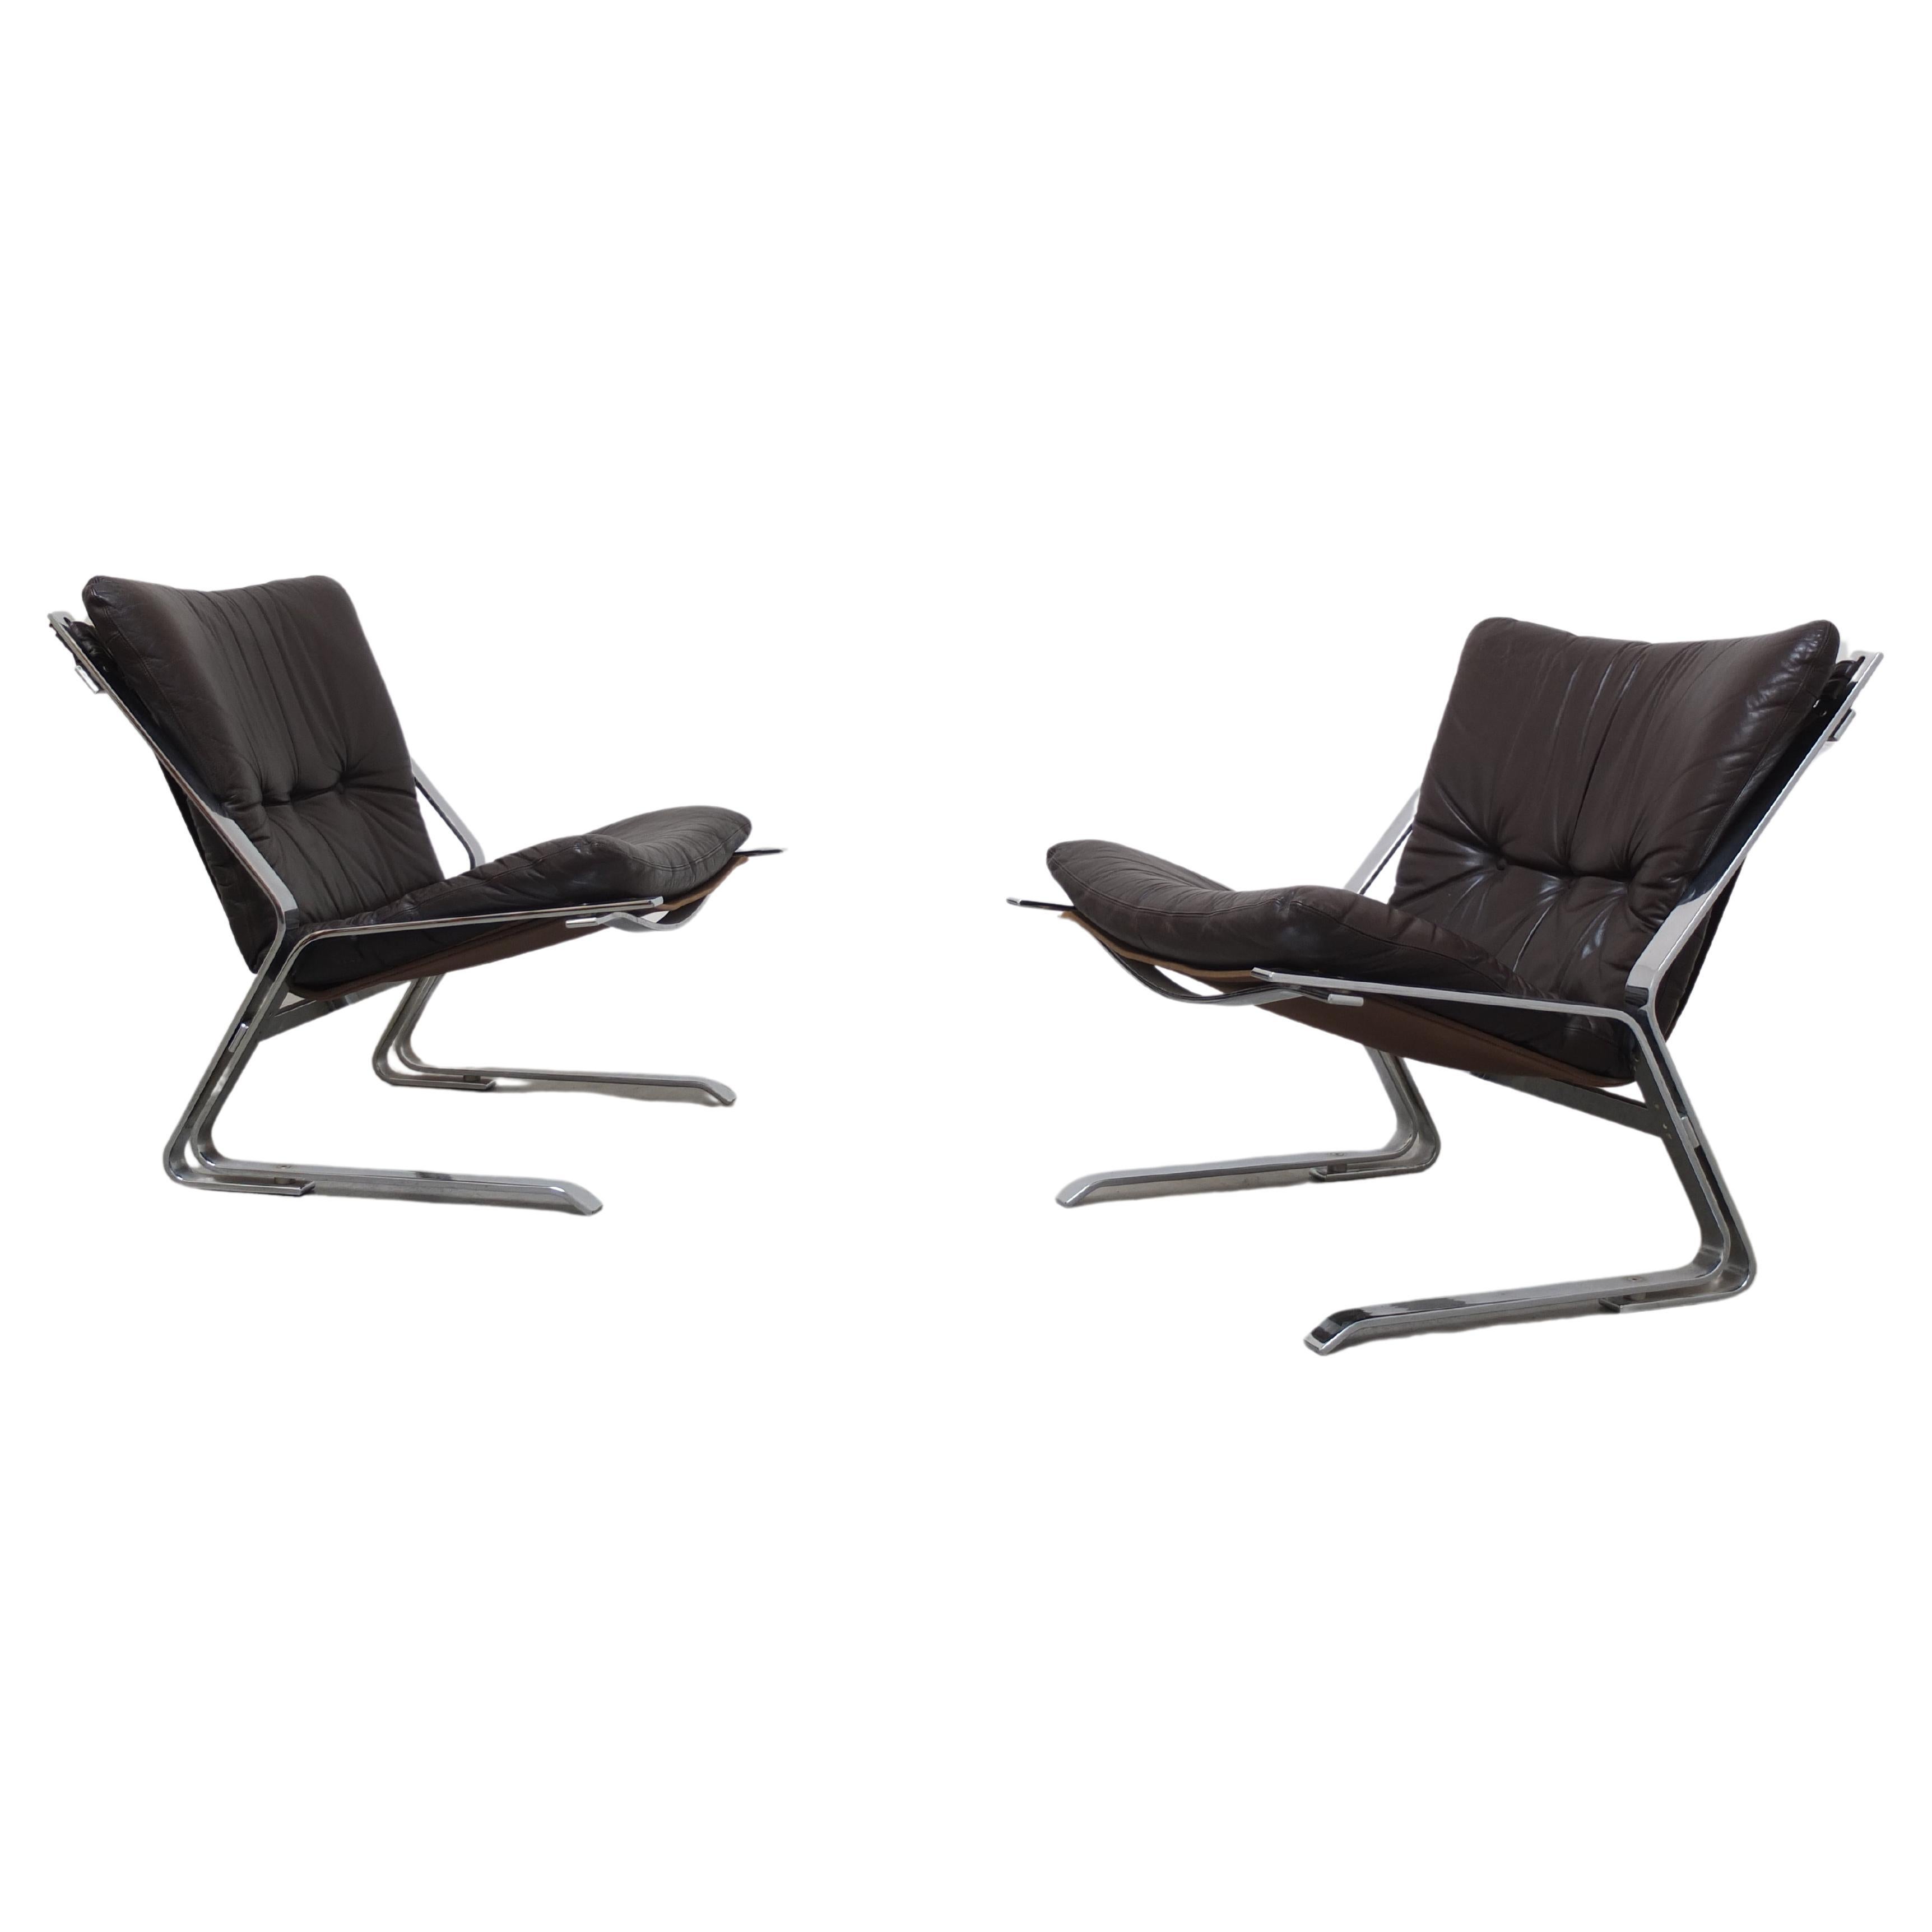 Rare Pair of 'Pirate' Lounge Chairs by Elsa & Nordahl Solheim for Rykken, 1960s For Sale